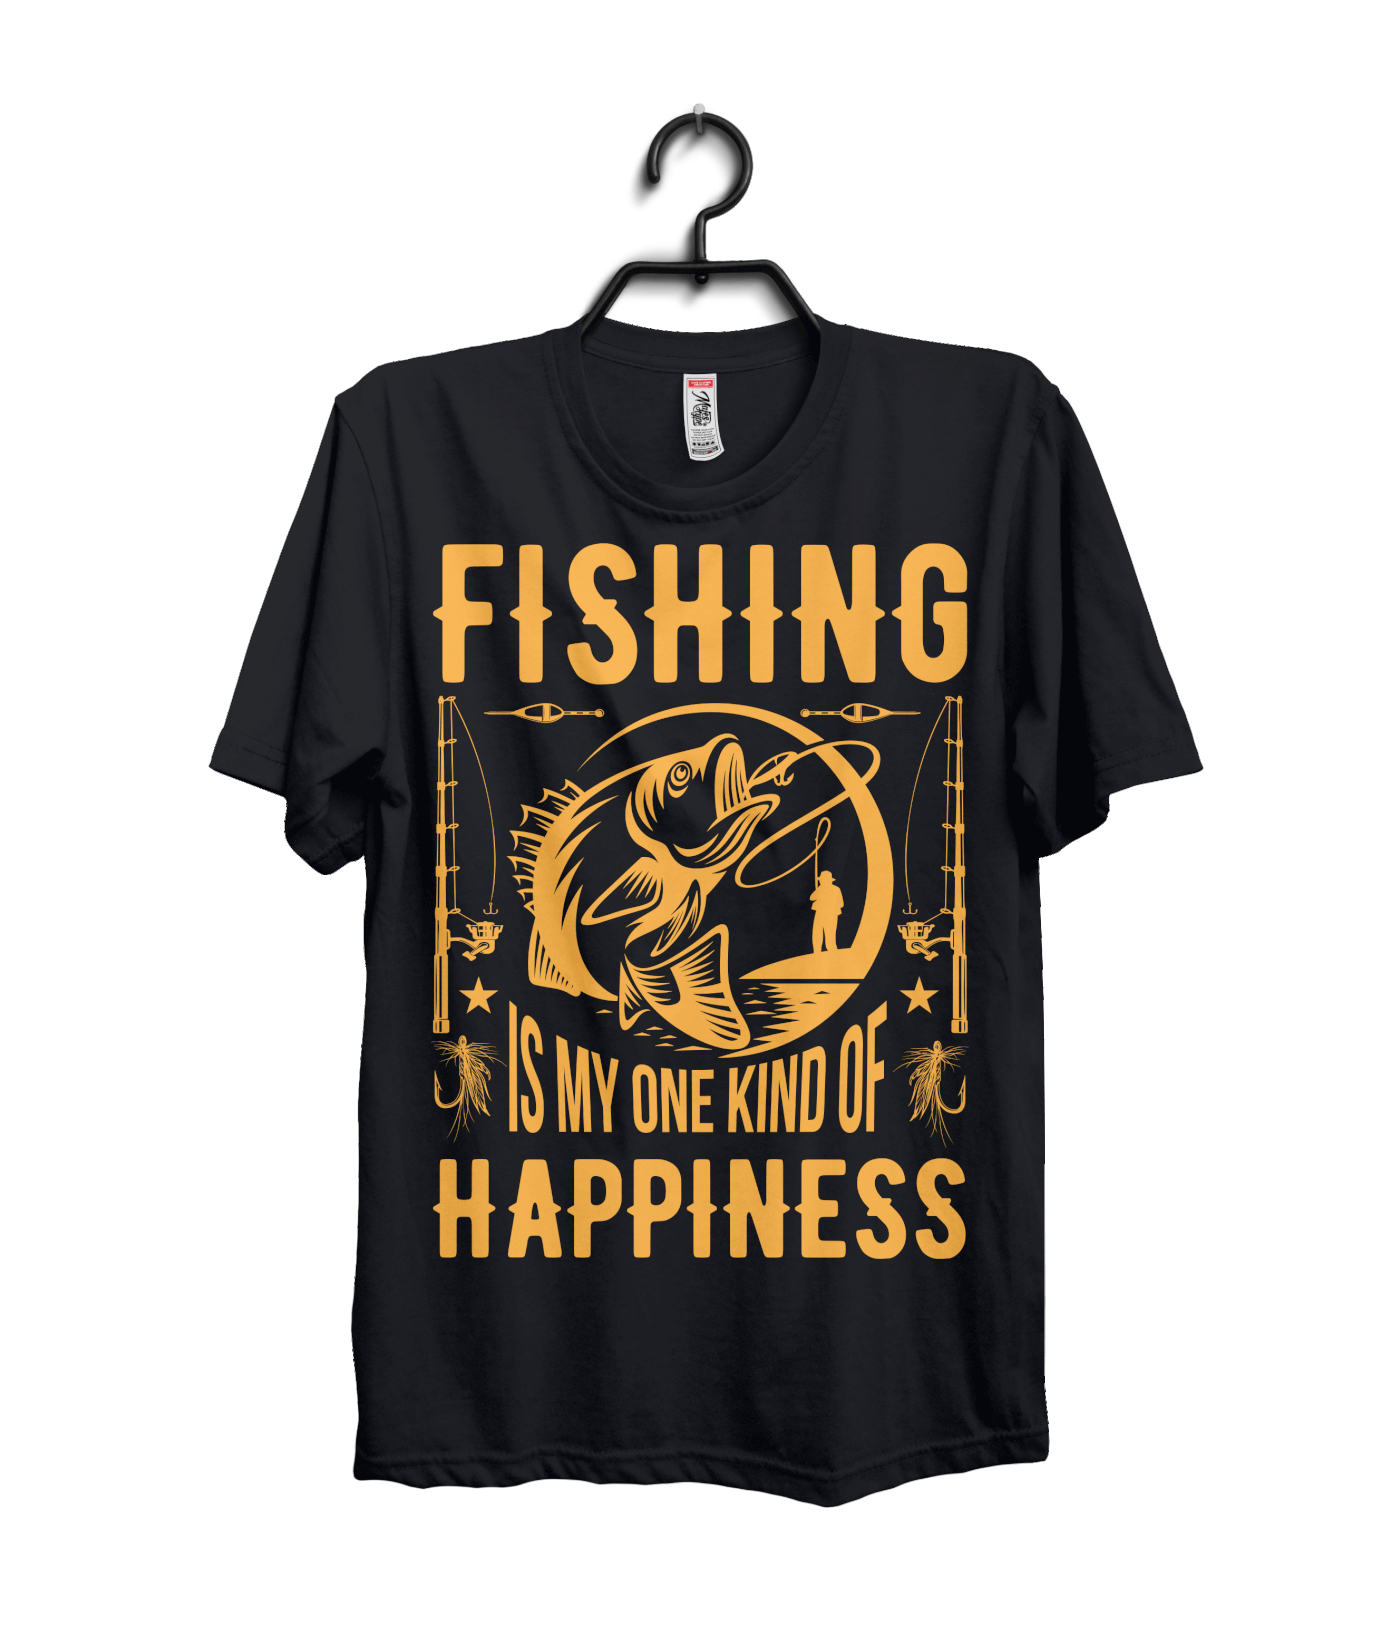 VECTOR FISHING T-SHIRT DESIGN
Please your order now to take the first step toward a remarkable logo 